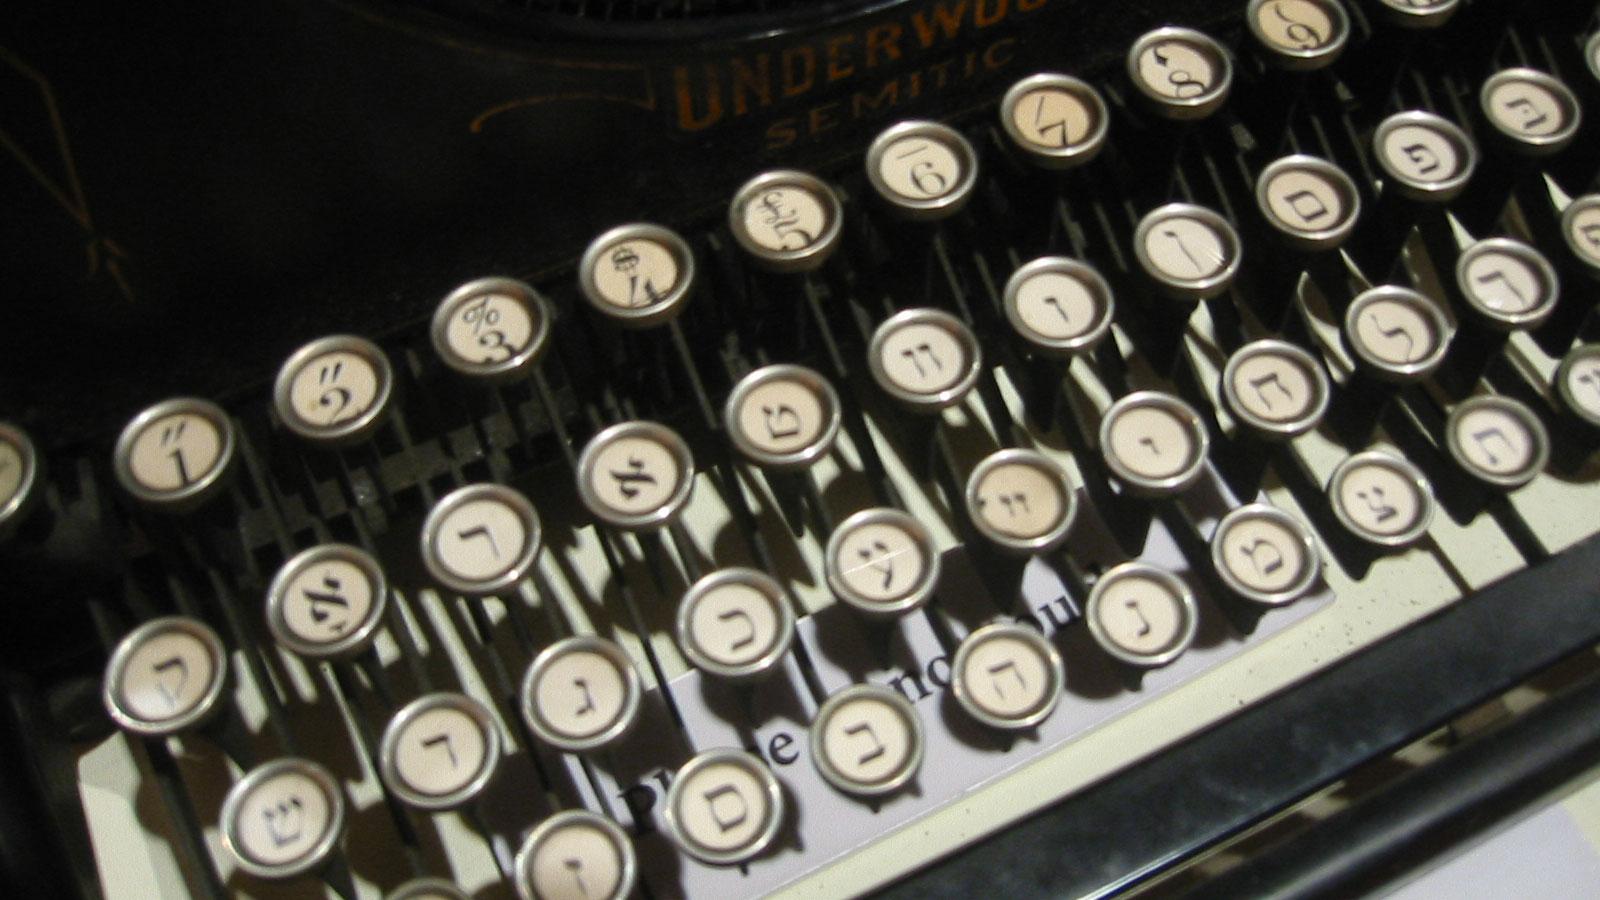 This Underwood typewriter features Yiddish letters of the aleph-beys, on display at the Museum of the City of New York. 